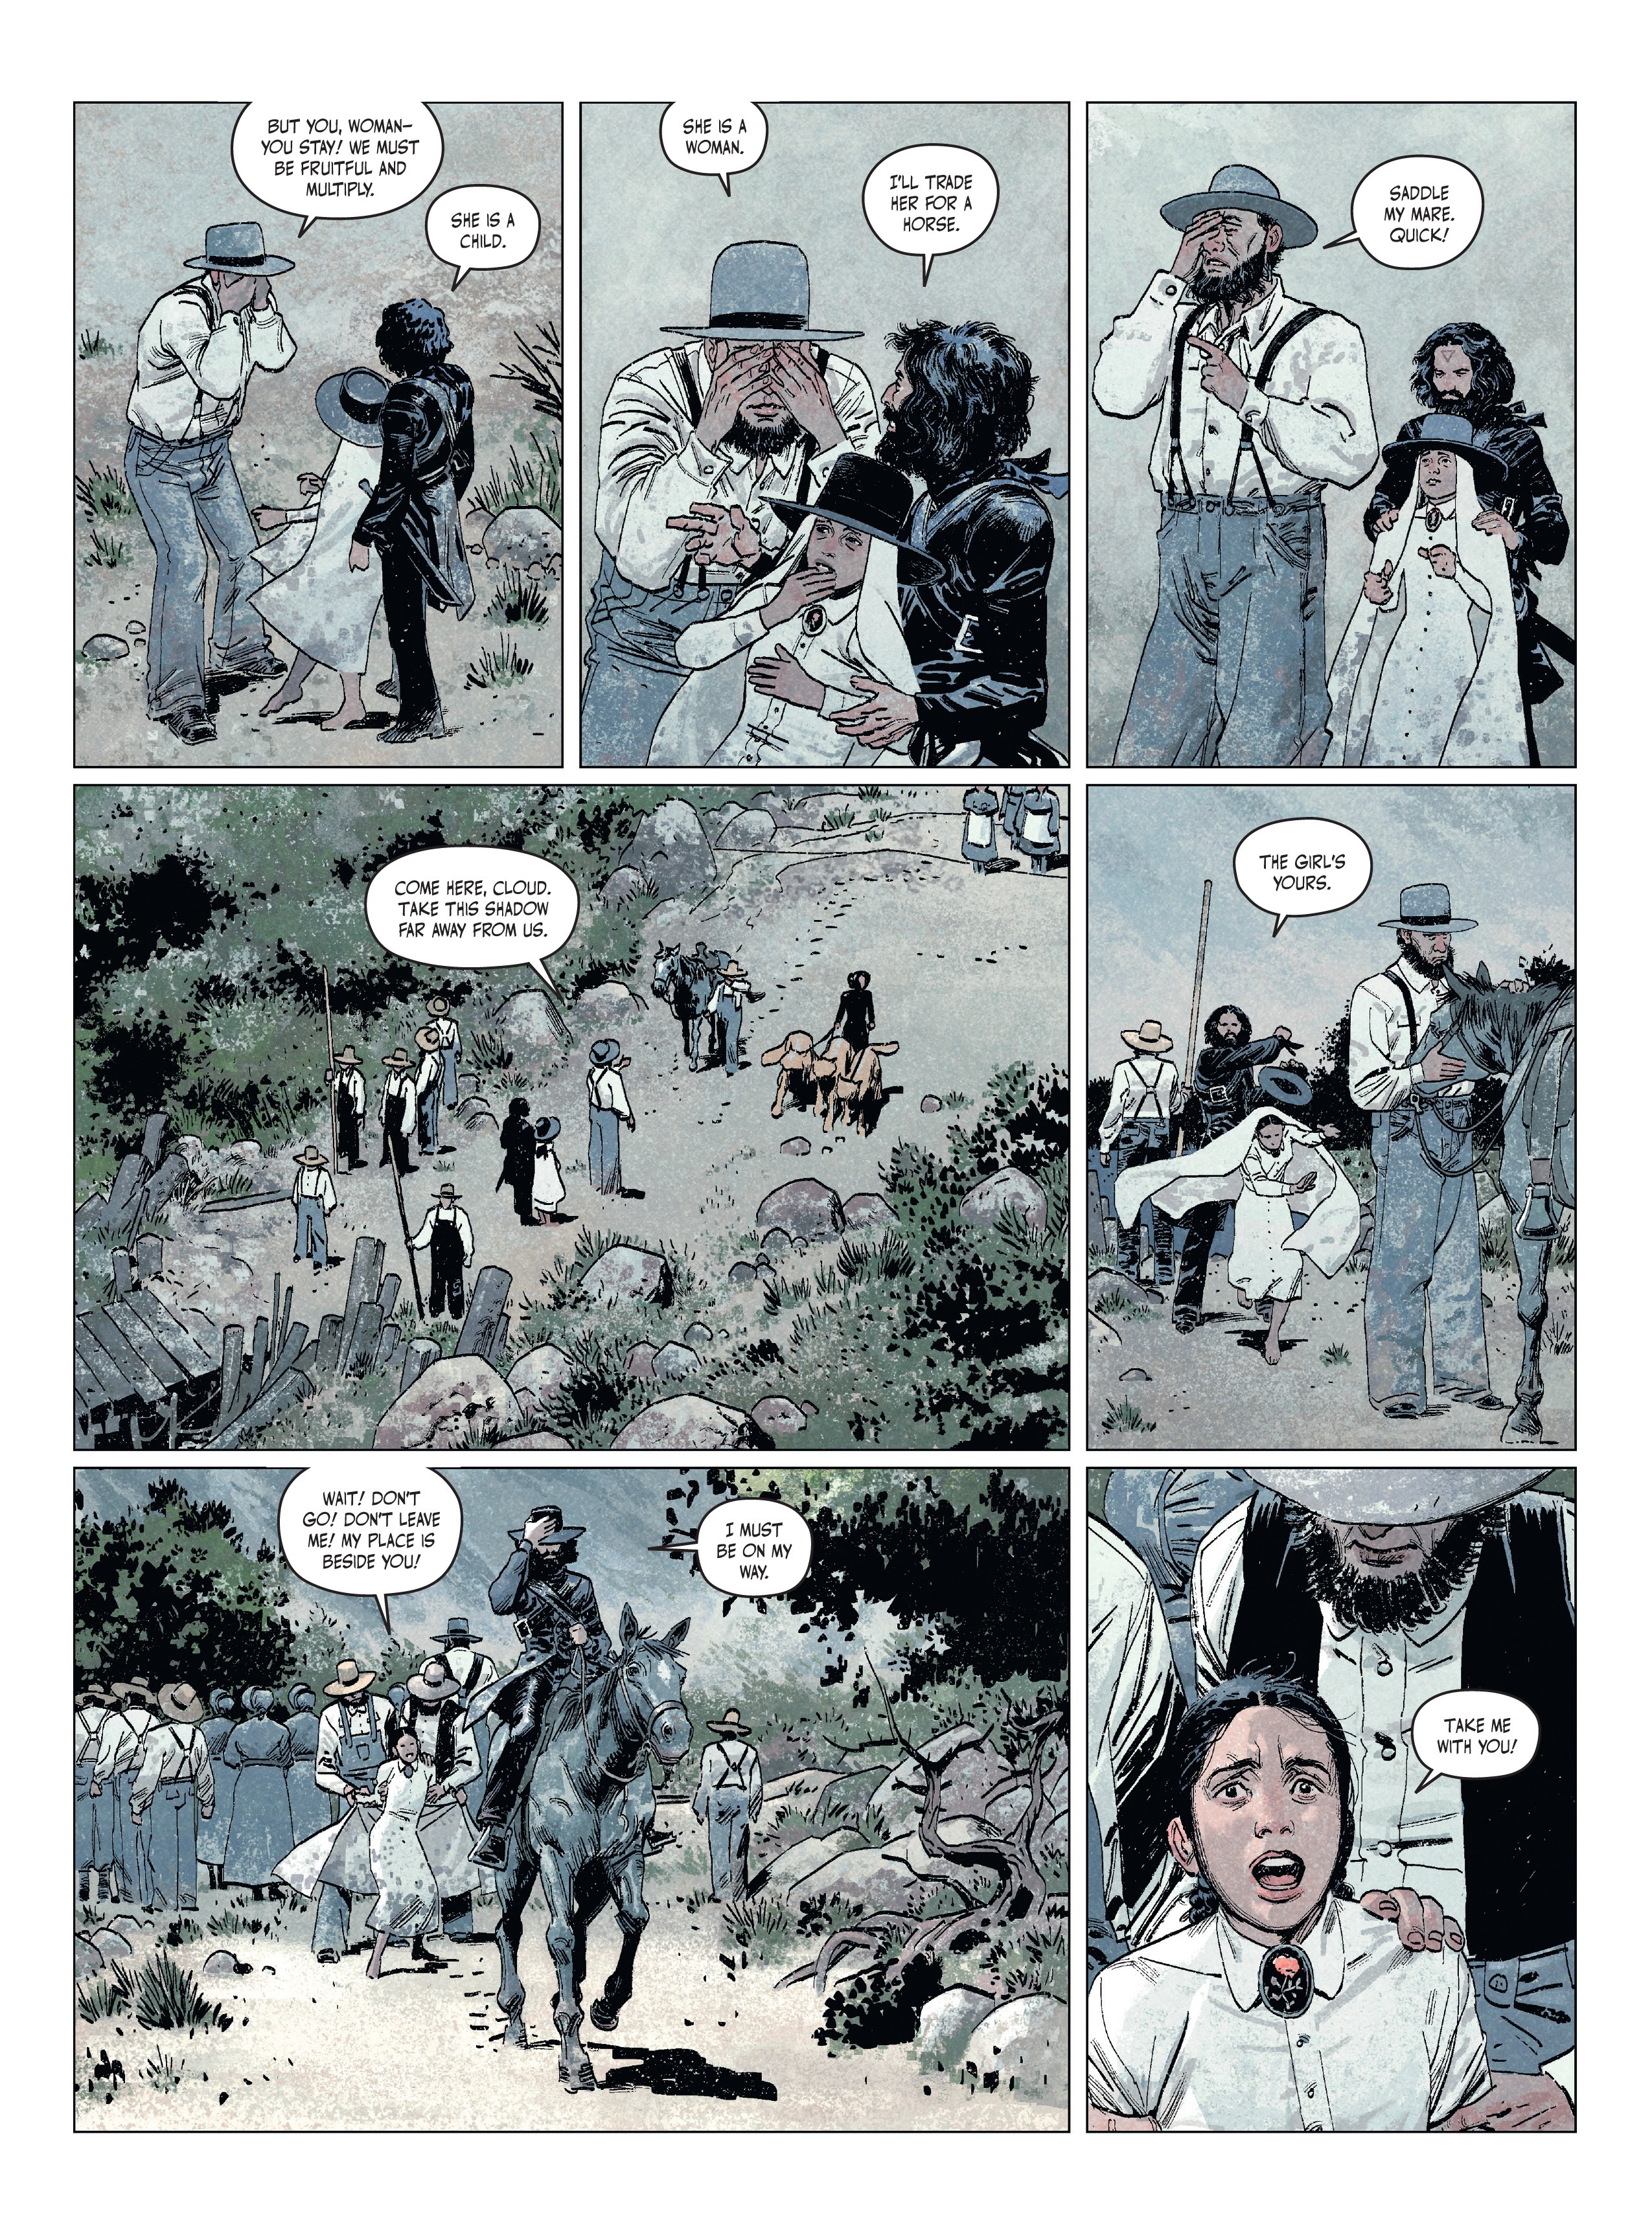 Read online The Sons of El Topo comic -  Issue # TPB 2 - 10